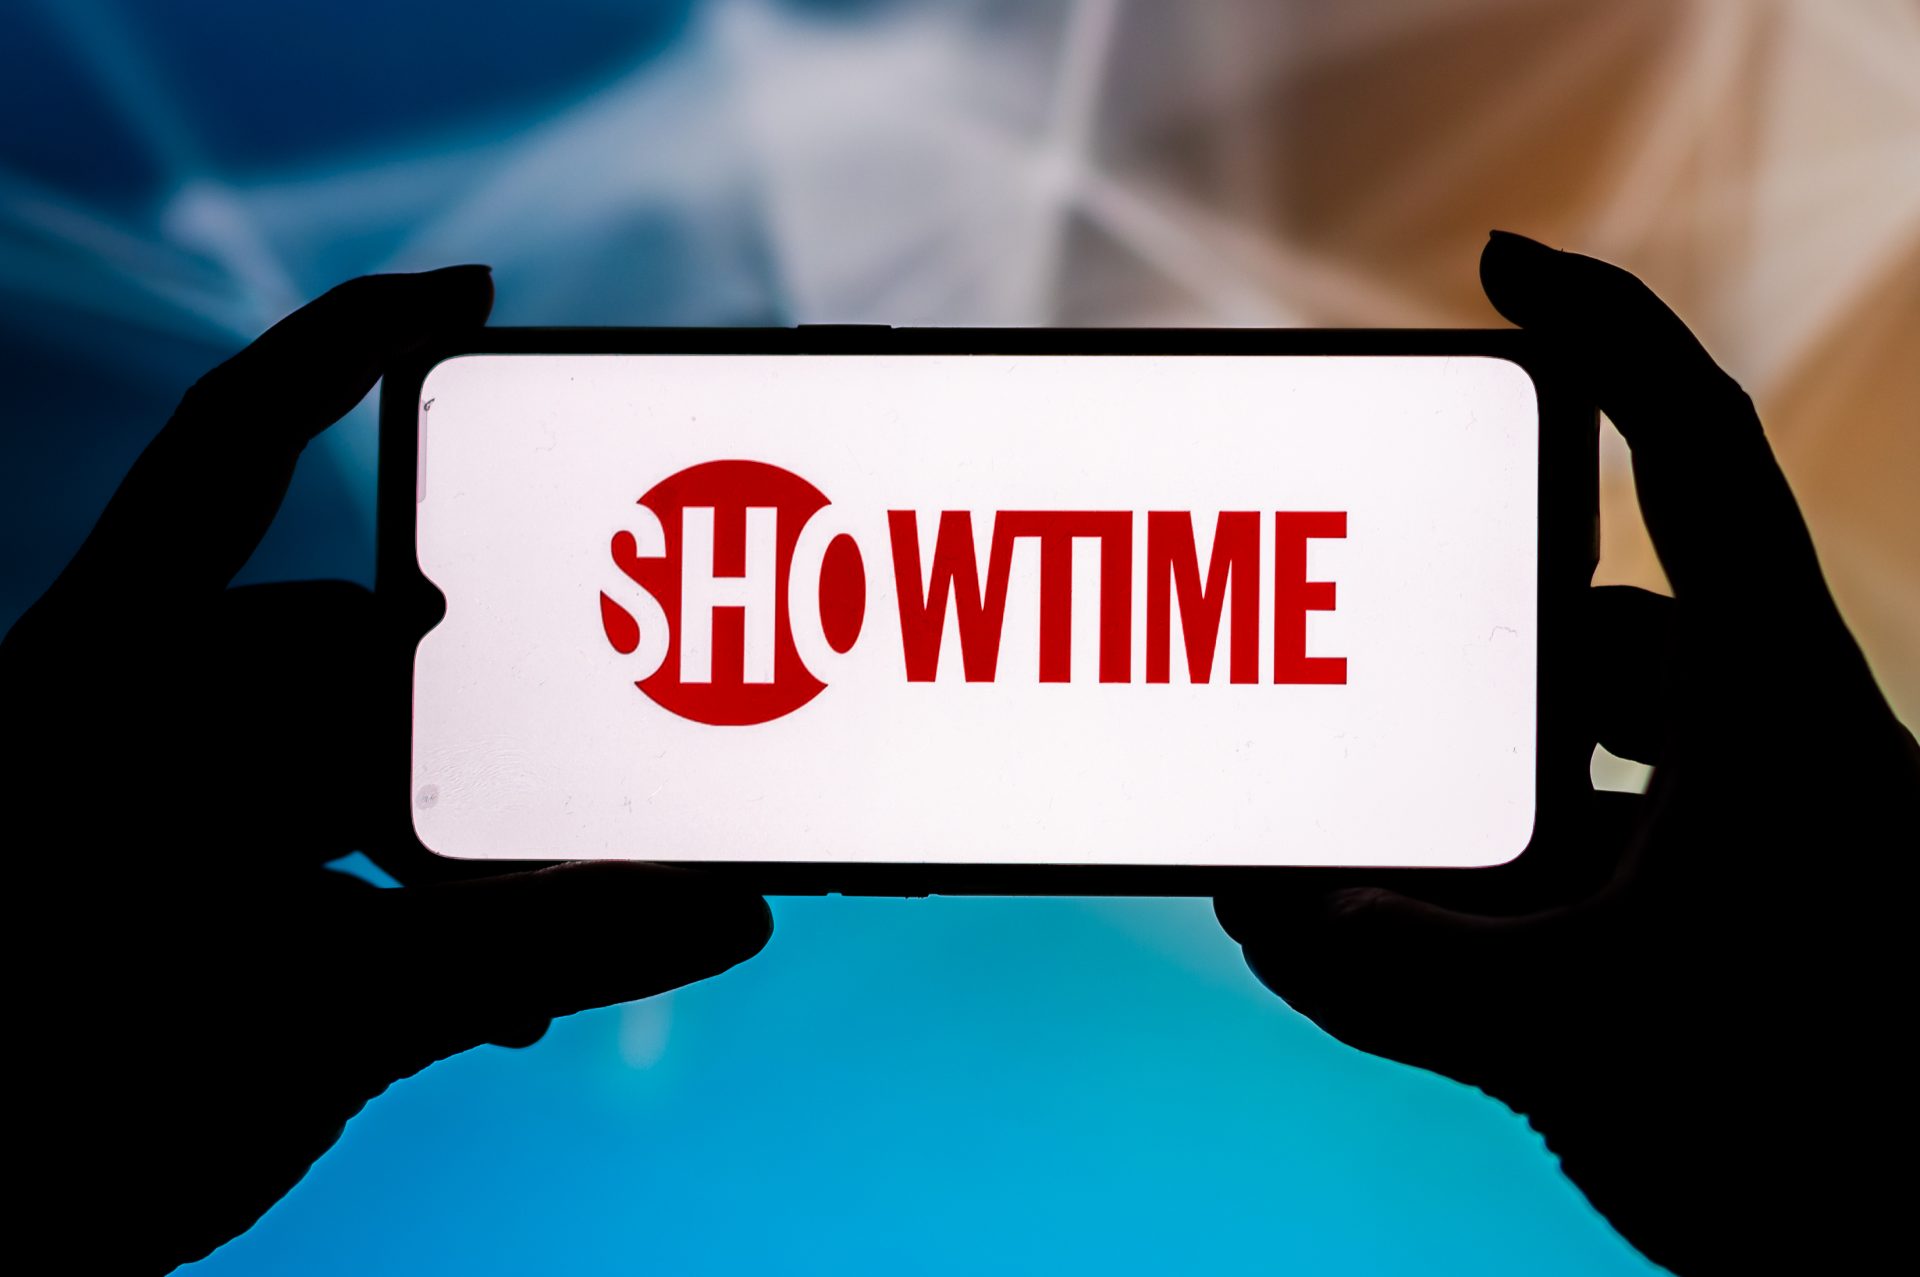 Showtime Announces The End Of Their Streaming Service